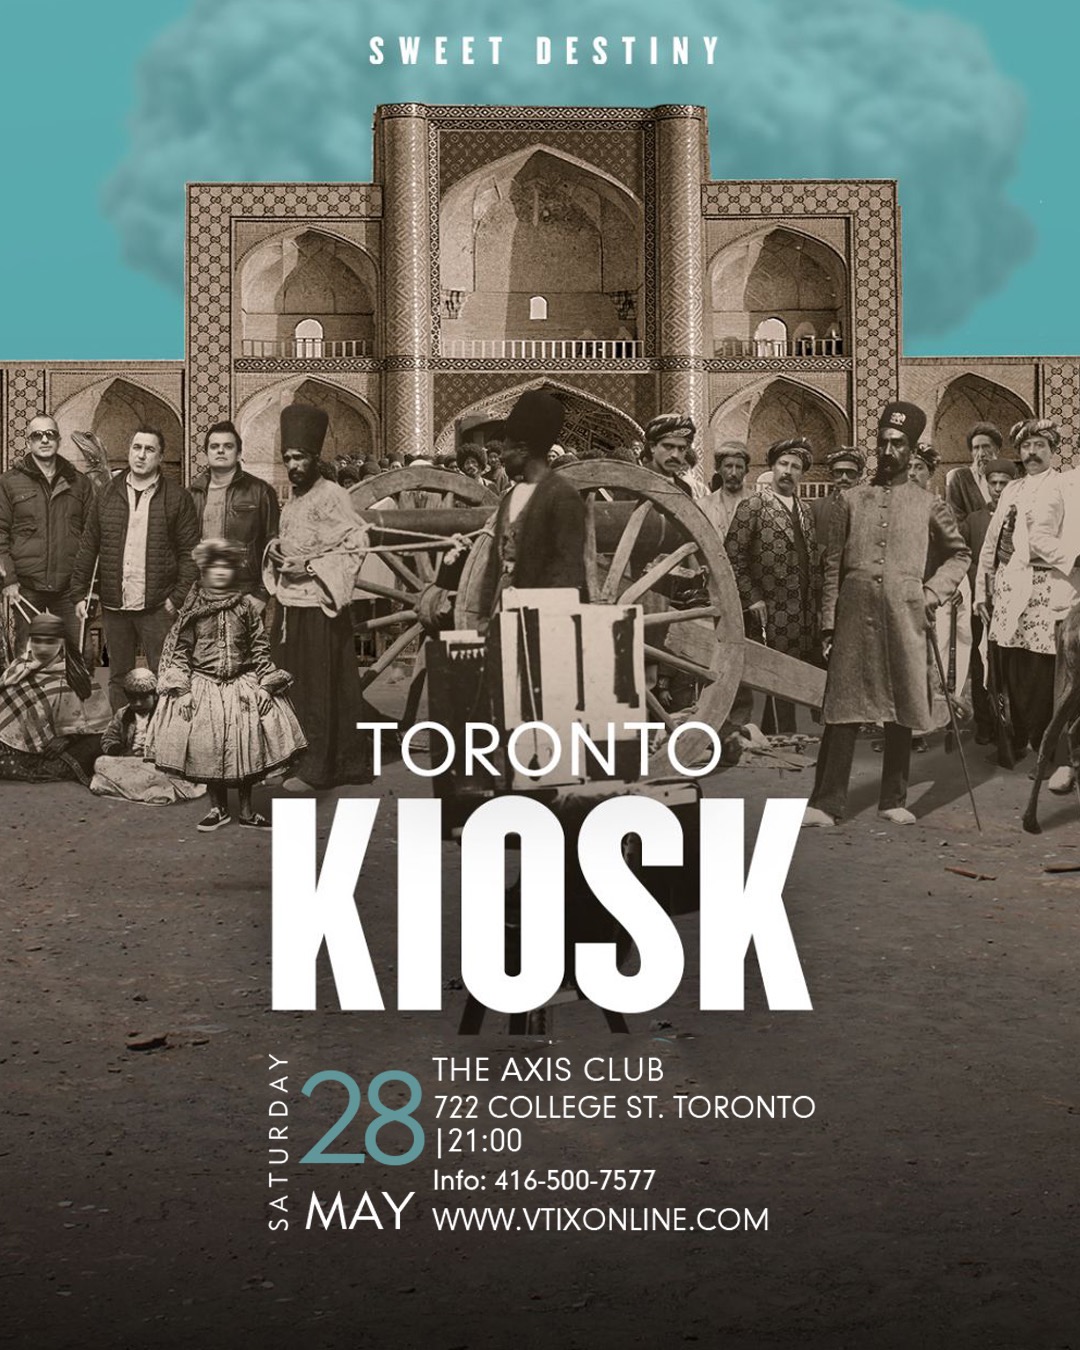 Kiosk Band Live on Stage in Toronto